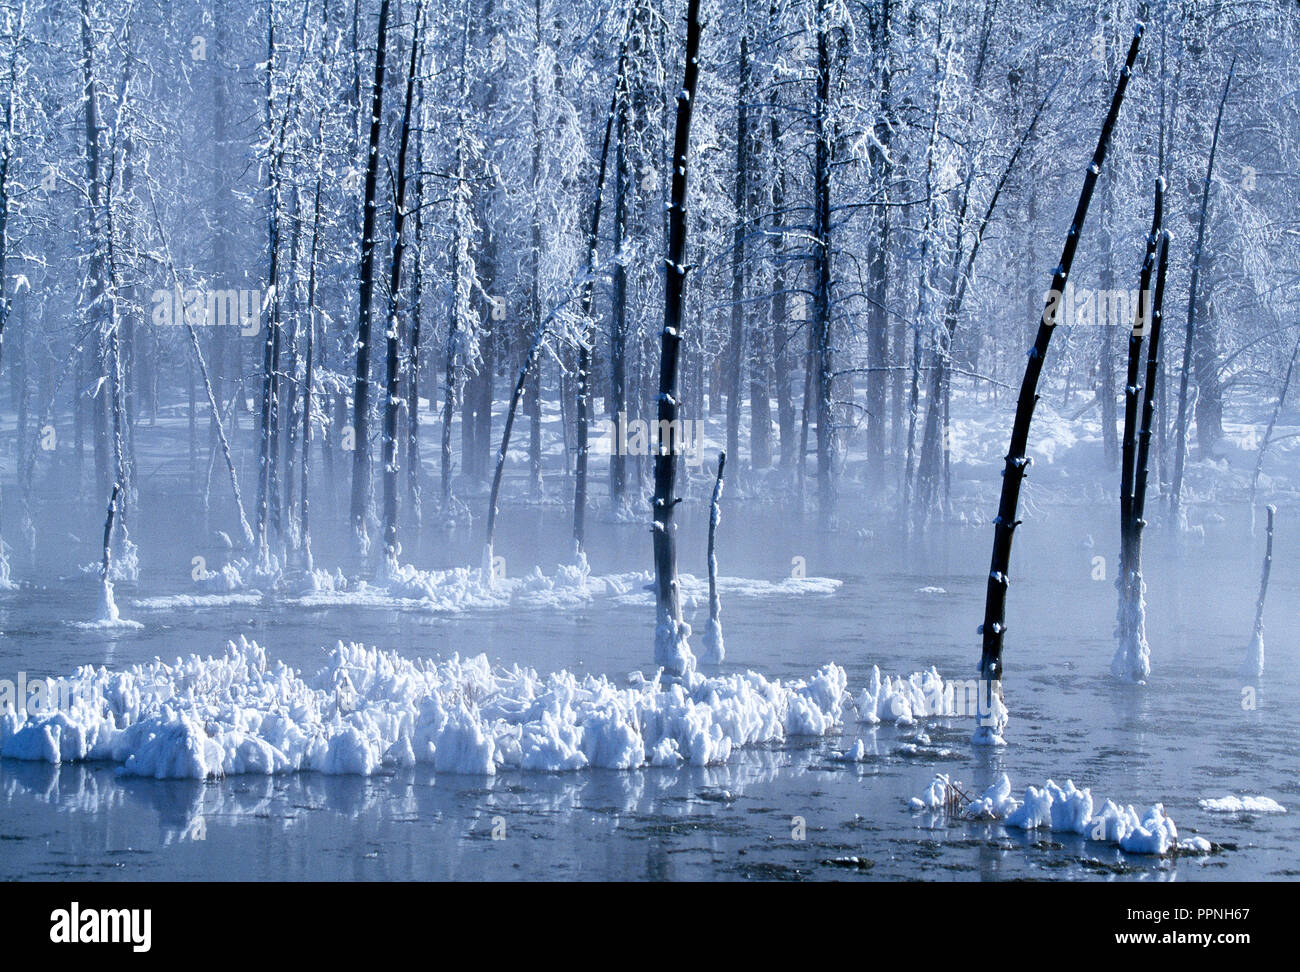 USA. Wyoming. Yellowstone National Park in winter. Snow covered trees in icy water. Stock Photo